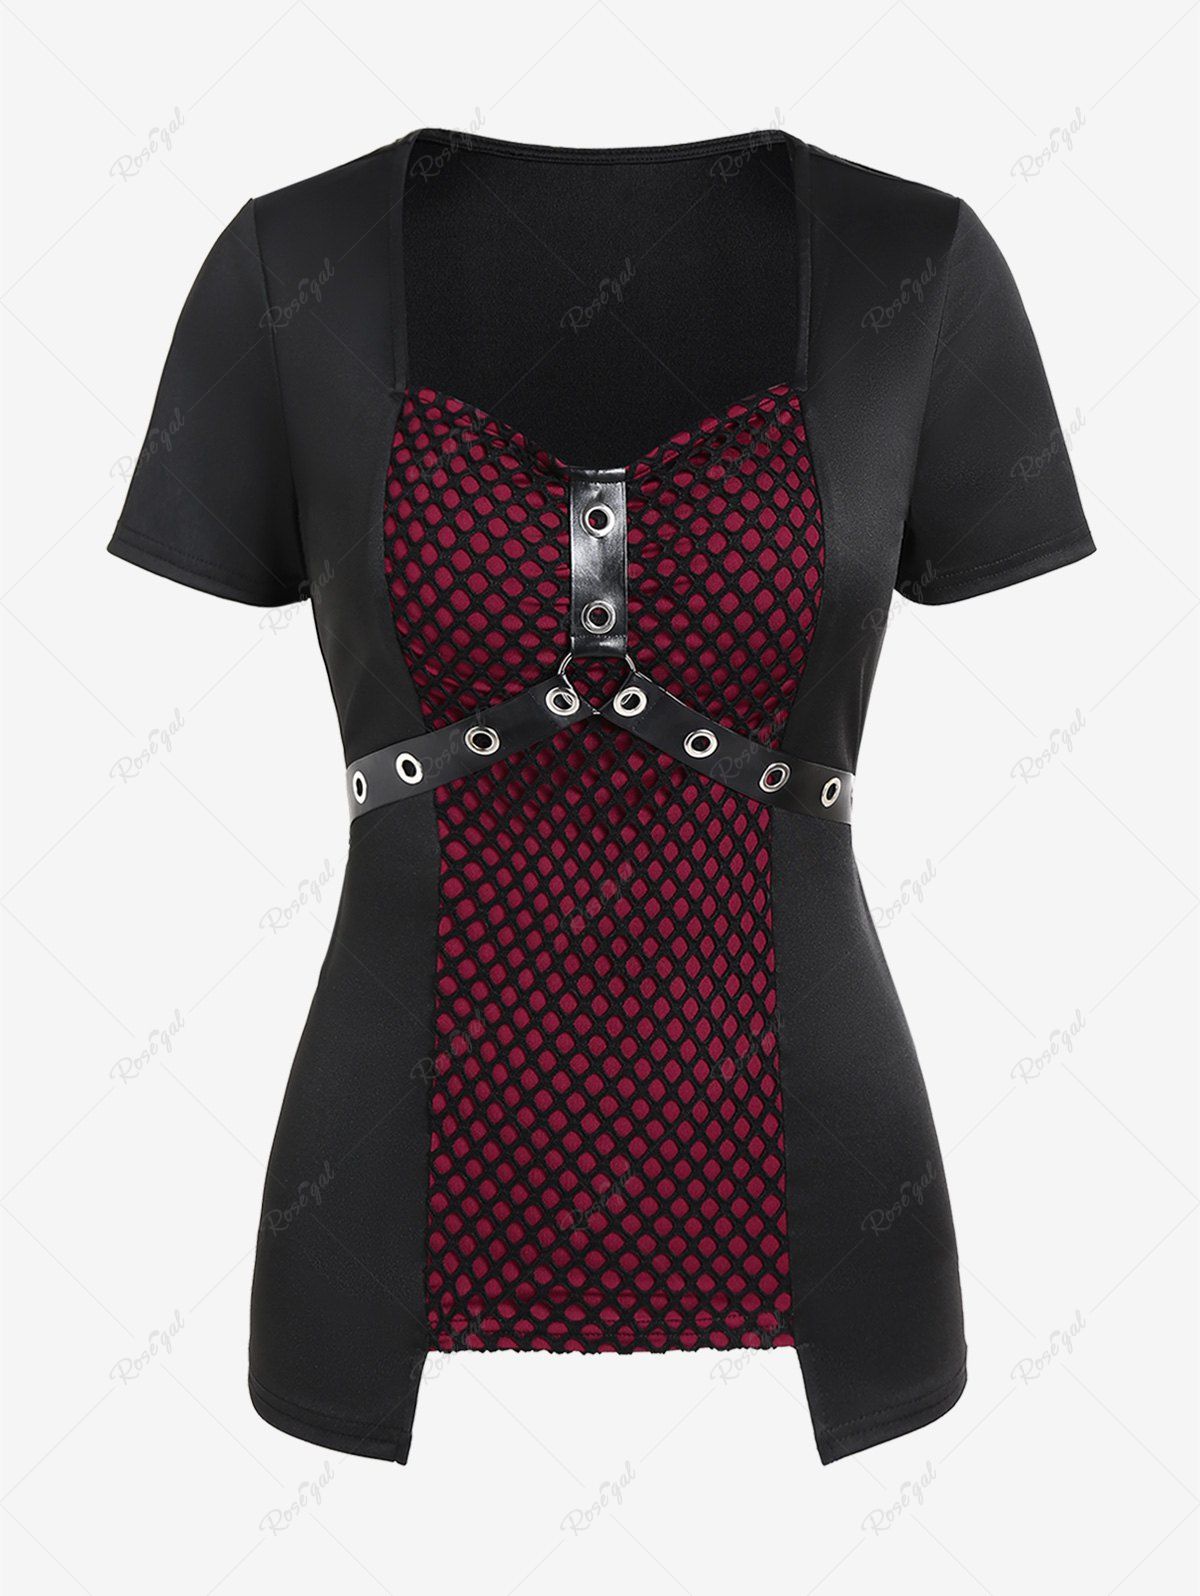 Trendy Gothic Fishnet Overlay PU Leather Straps Grommets Top  